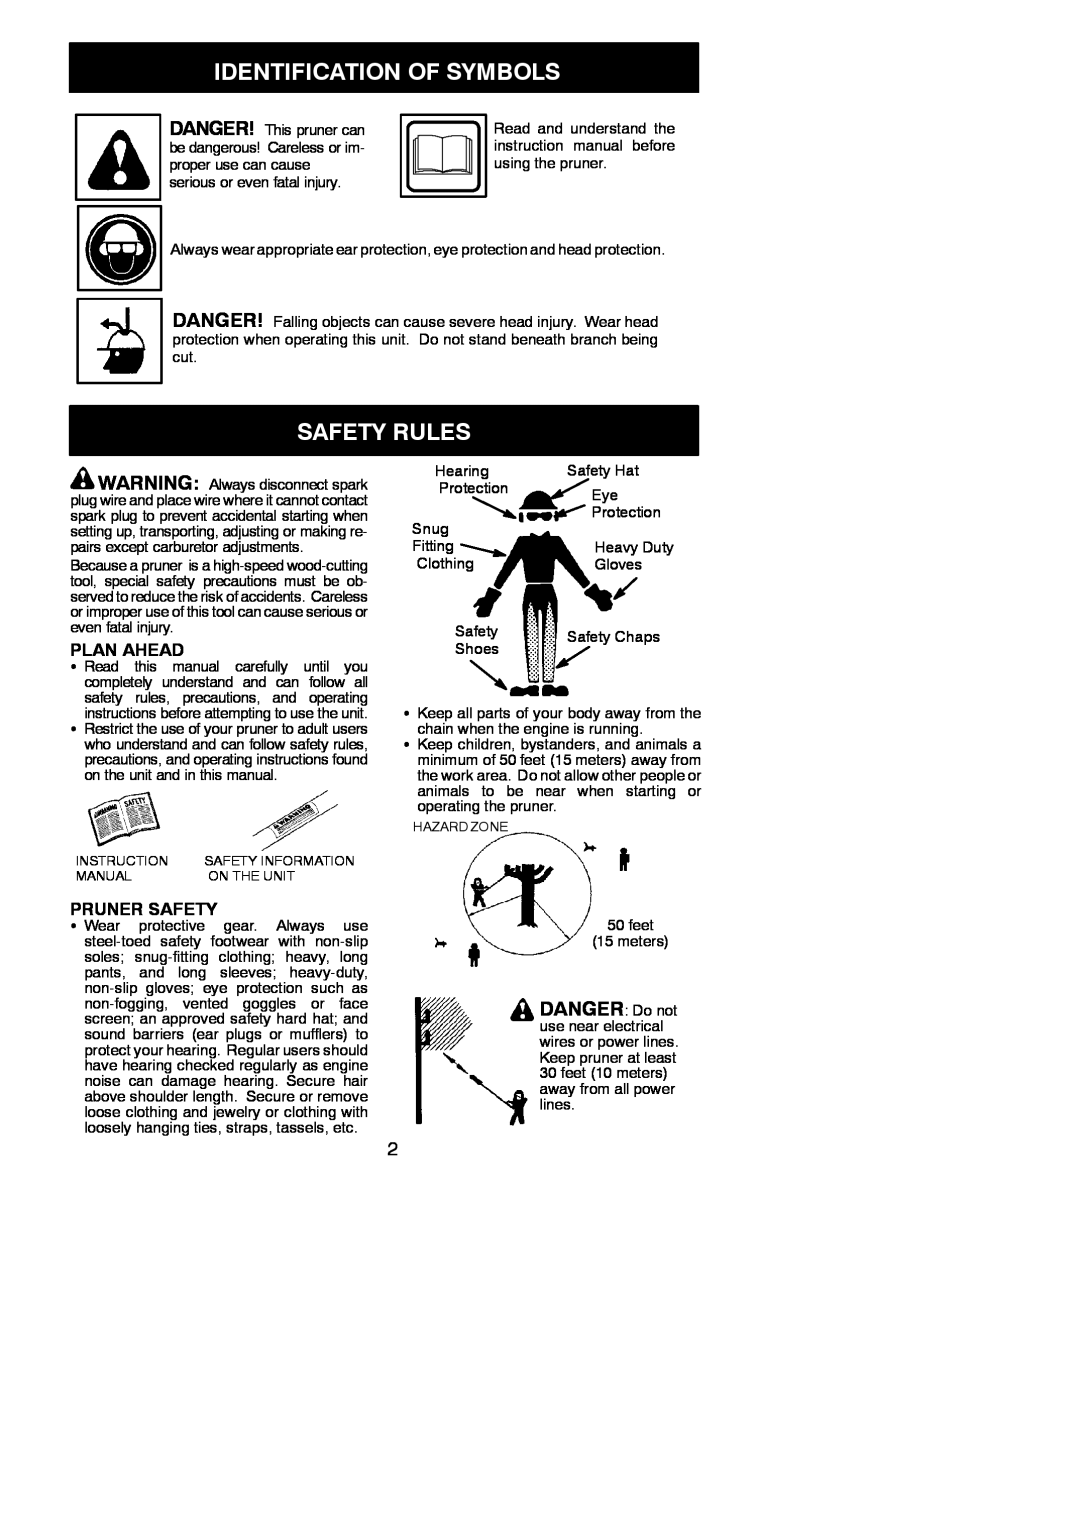 Poulan 952711882, PP46ET instruction manual Identification Of Symbols, Safety Rules, Plan Ahead, Pruner Safety 